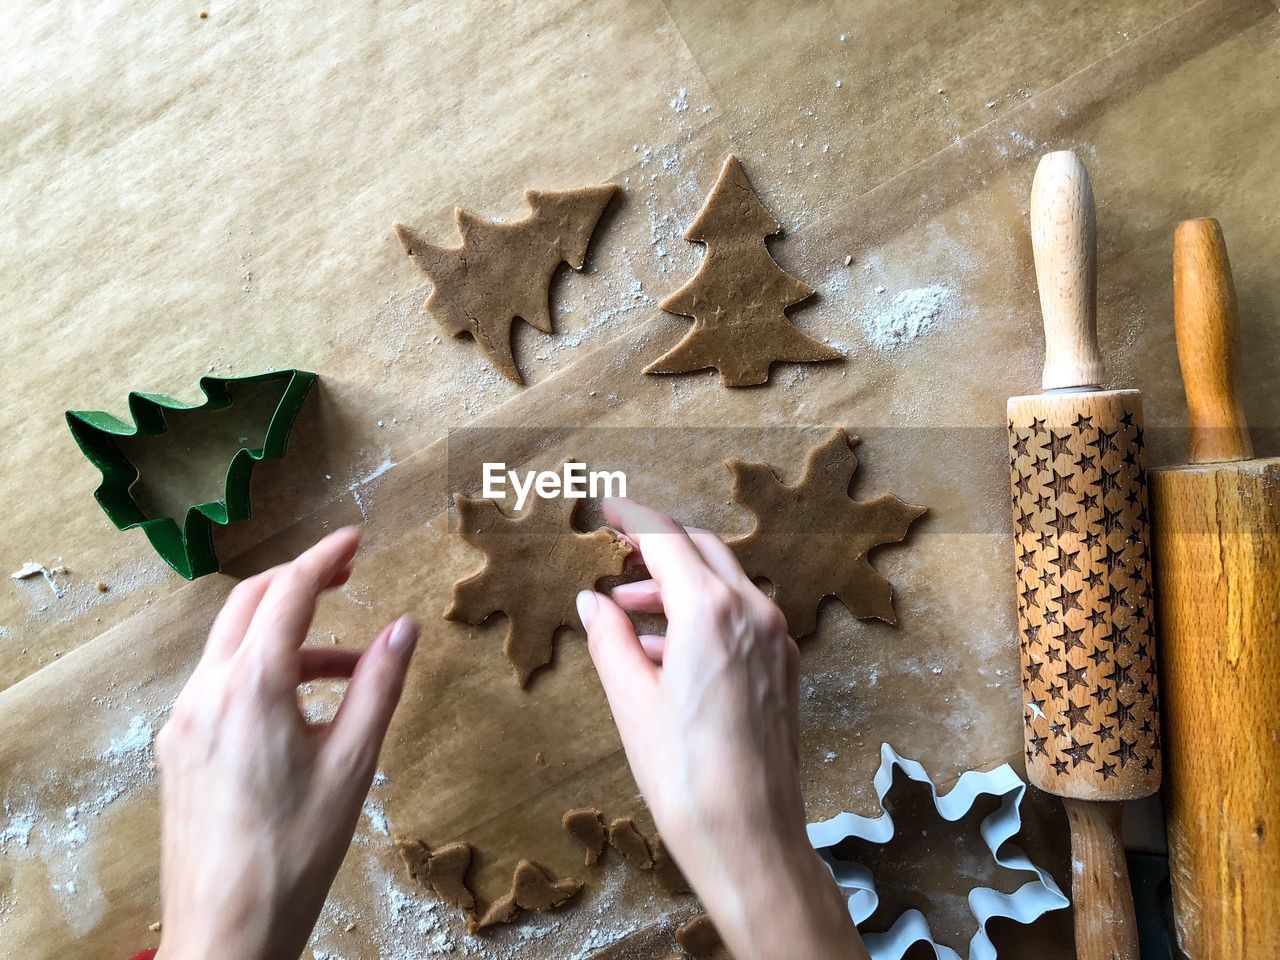 Cropped image of hand making cookies